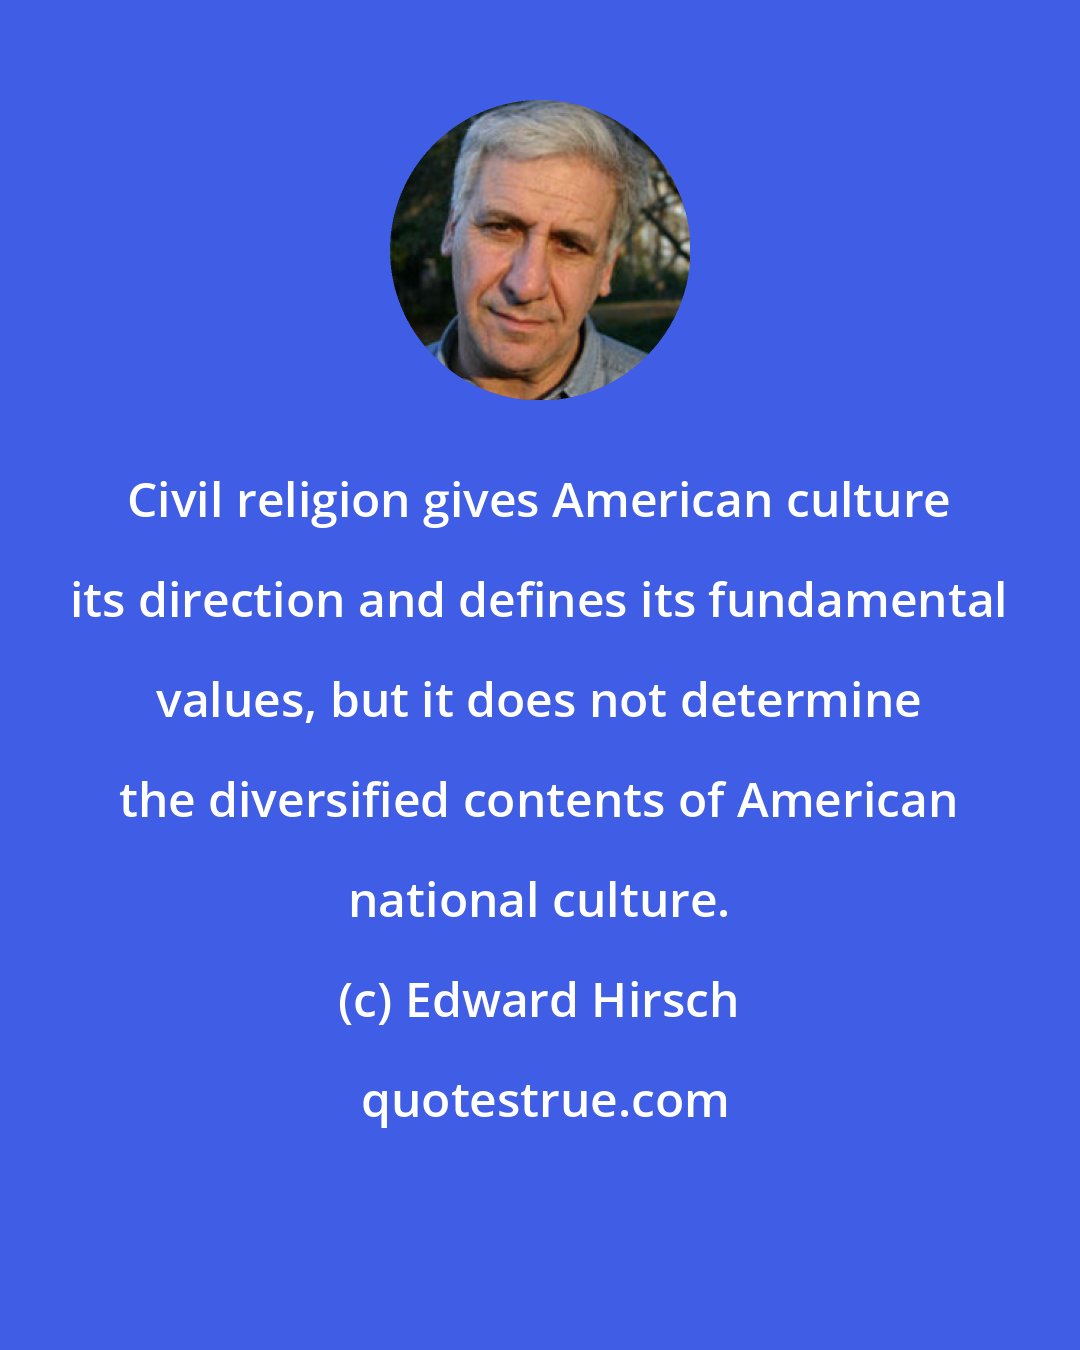 Edward Hirsch: Civil religion gives American culture its direction and defines its fundamental values, but it does not determine the diversified contents of American national culture.